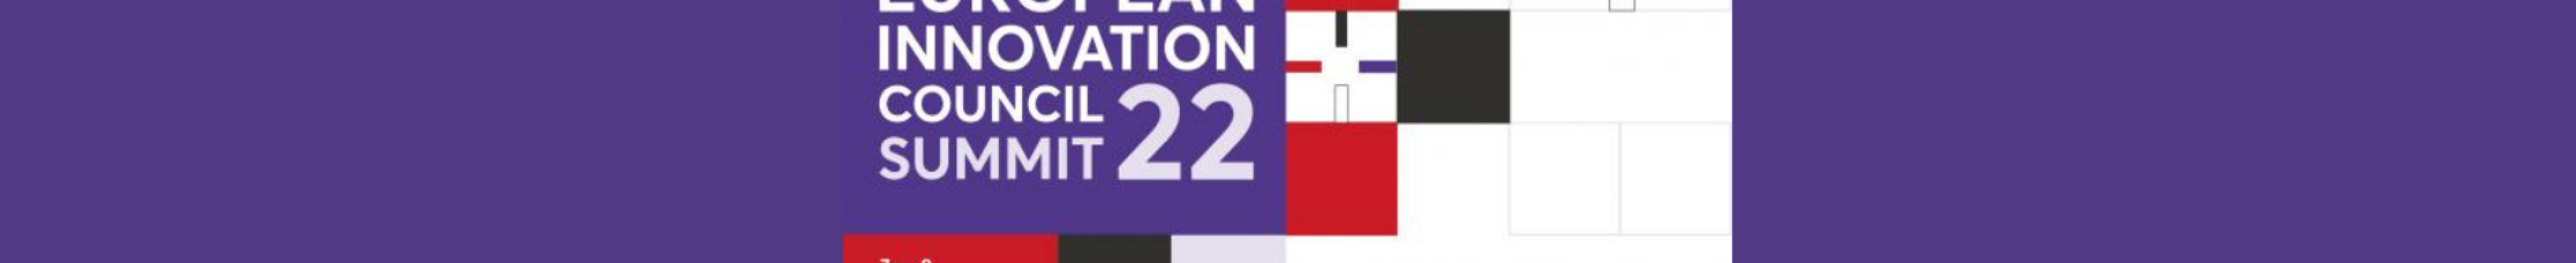 banners_2022_eicsummit.png